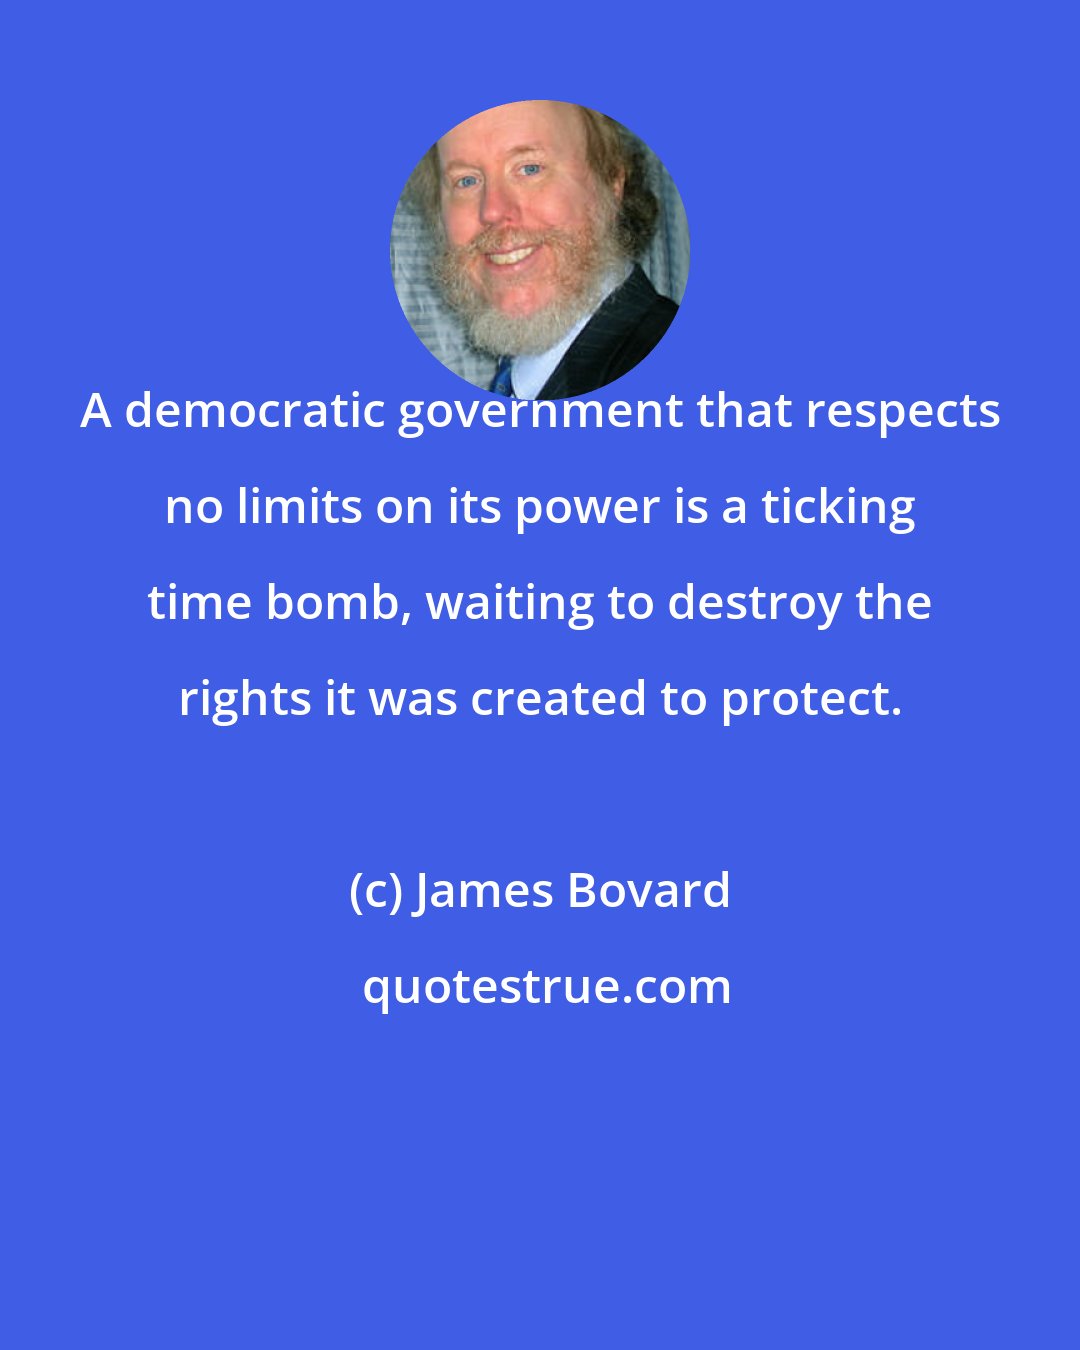 James Bovard: A democratic government that respects no limits on its power is a ticking time bomb, waiting to destroy the rights it was created to protect.